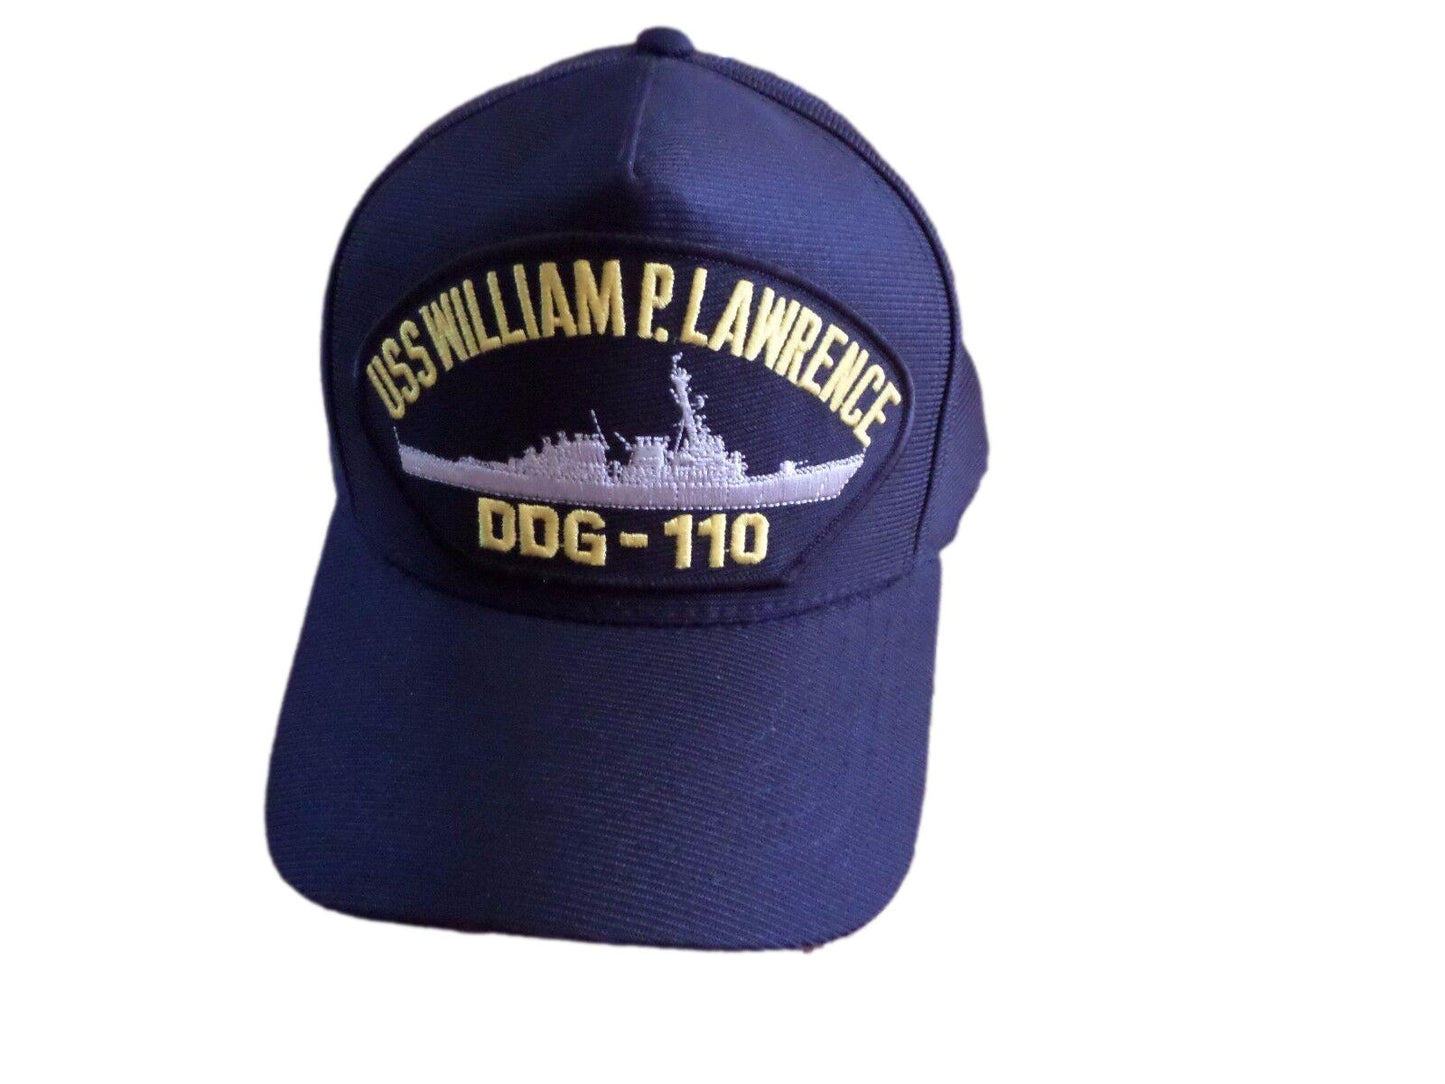 USS WILLIAM P LAWRENCE DDG-110 NAVY SHIP HAT U.S MILITARY OFFICIAL BALL CAP USA